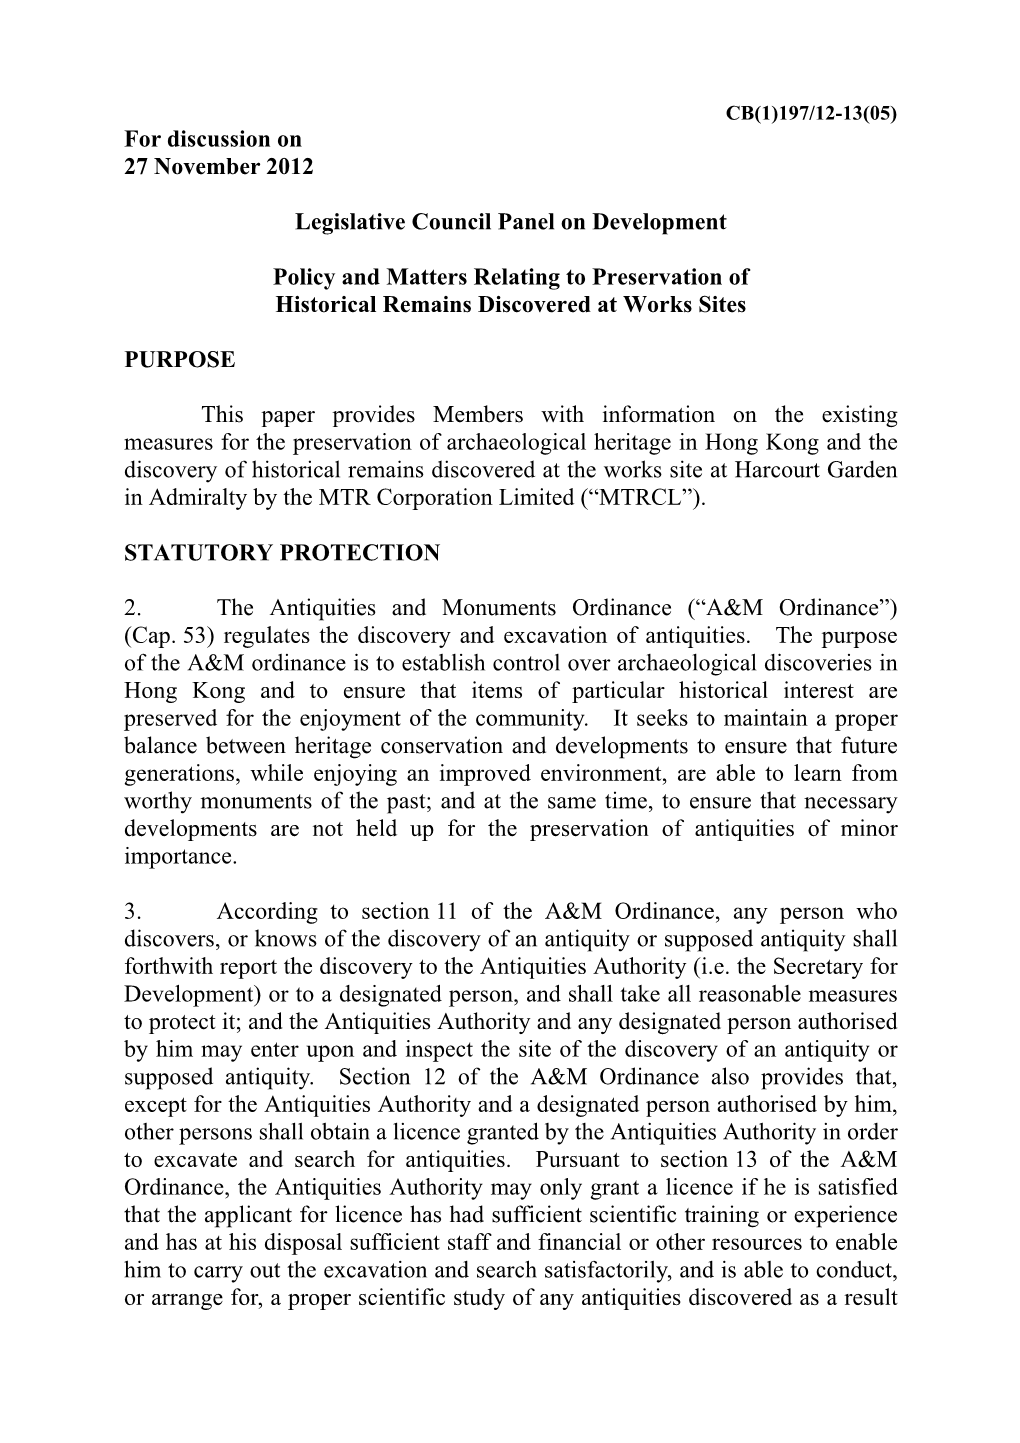 Administration's Paper on Policy and Matters Relating to Preservation Of